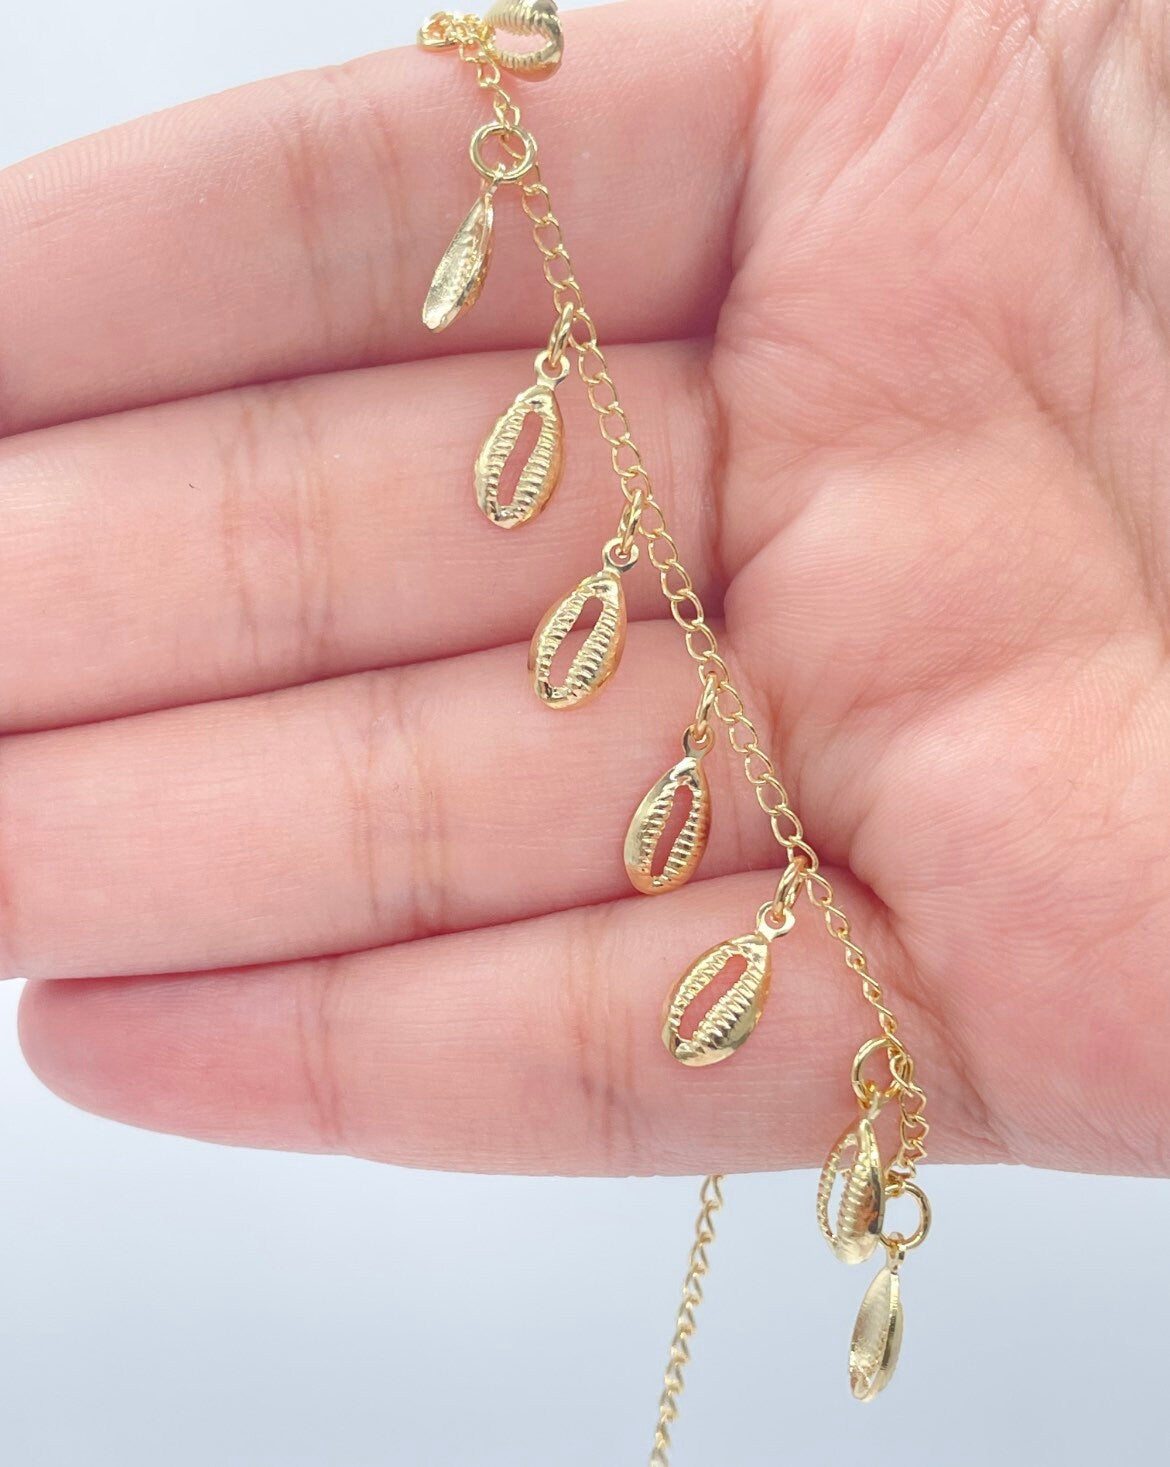 18k Gold Layered Dainty Chain with Eleven Extra Light Cowrie Shell Charms,